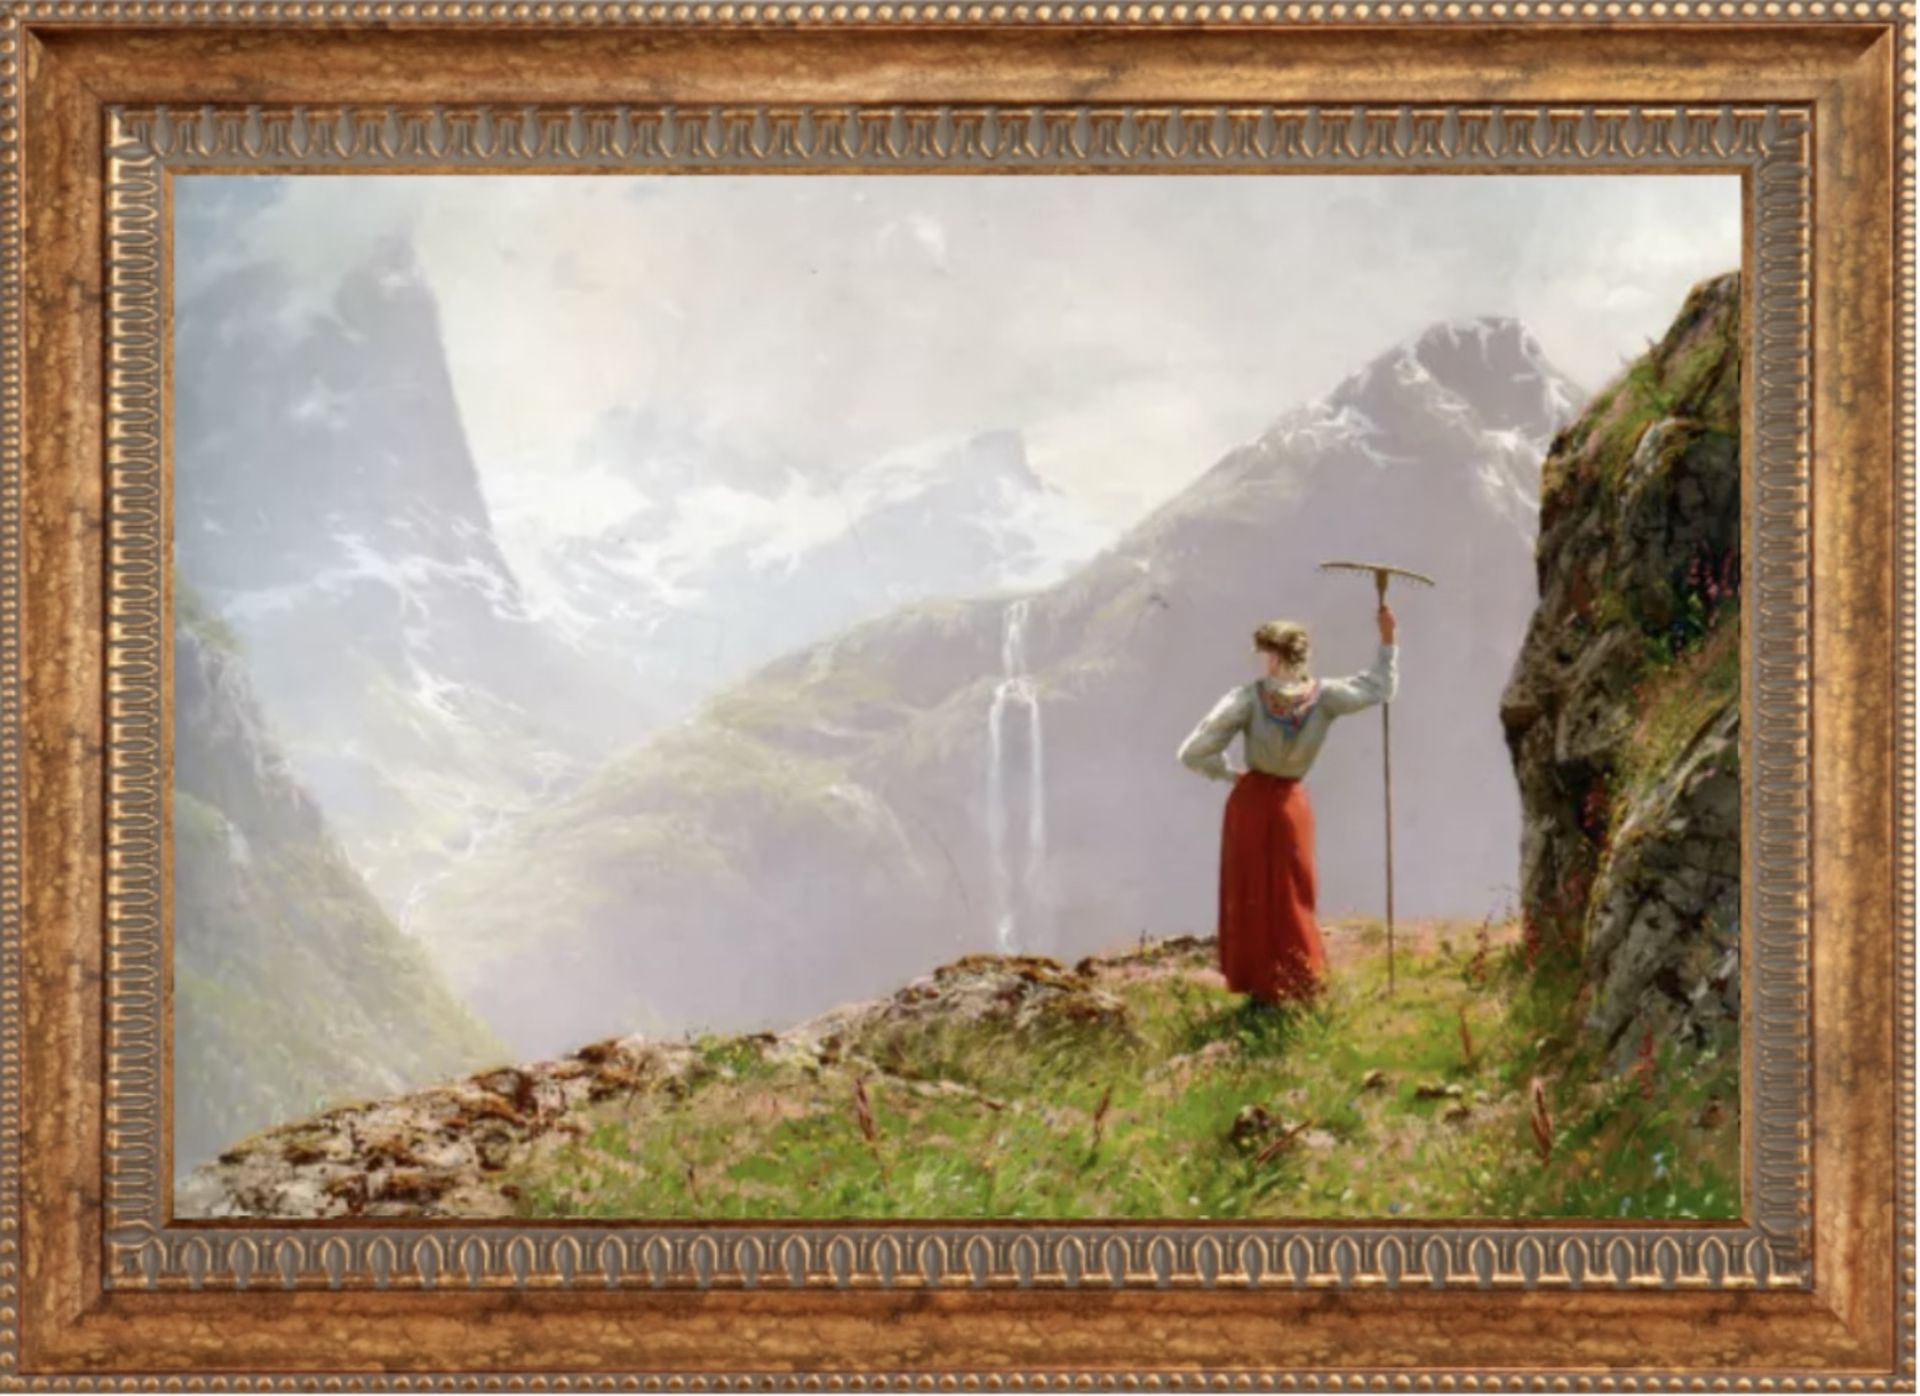 Hans Dahl "Admiring the View" Oil Painting